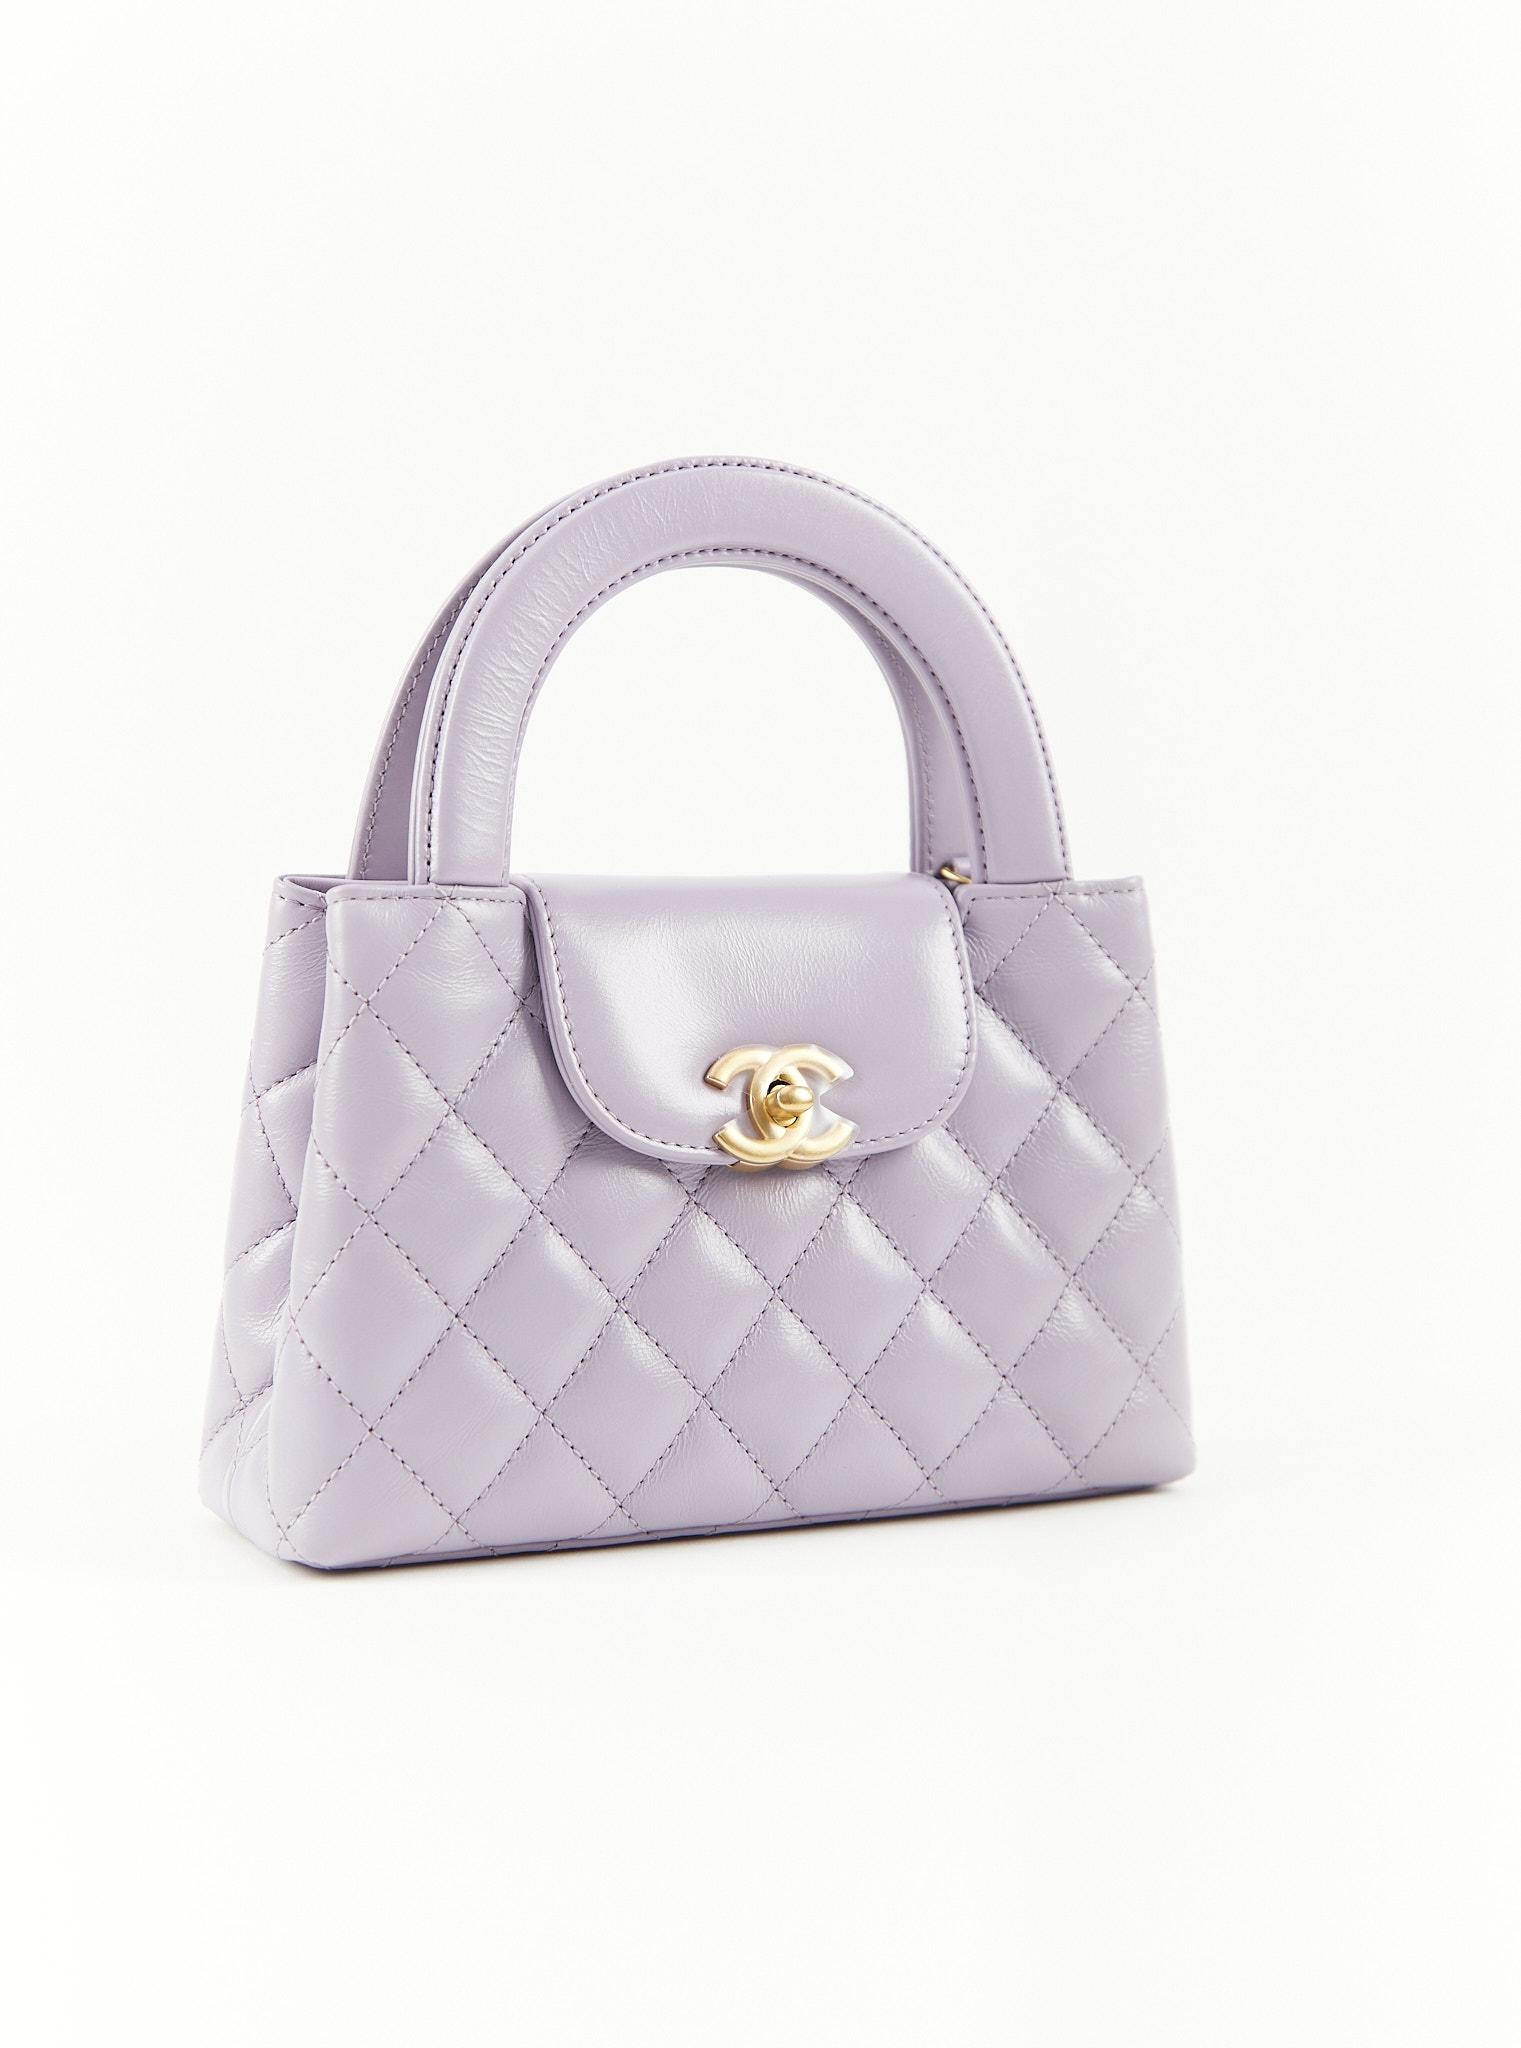 Chanel Small Kelly Bag in Lilac

Aged Calfskin Leather with Gold-Tone Hardware

Accompanied by: Chanel Box, Dustbag & Authenticity Chip

Dimensions: H 17 x W 25 x D 8cm